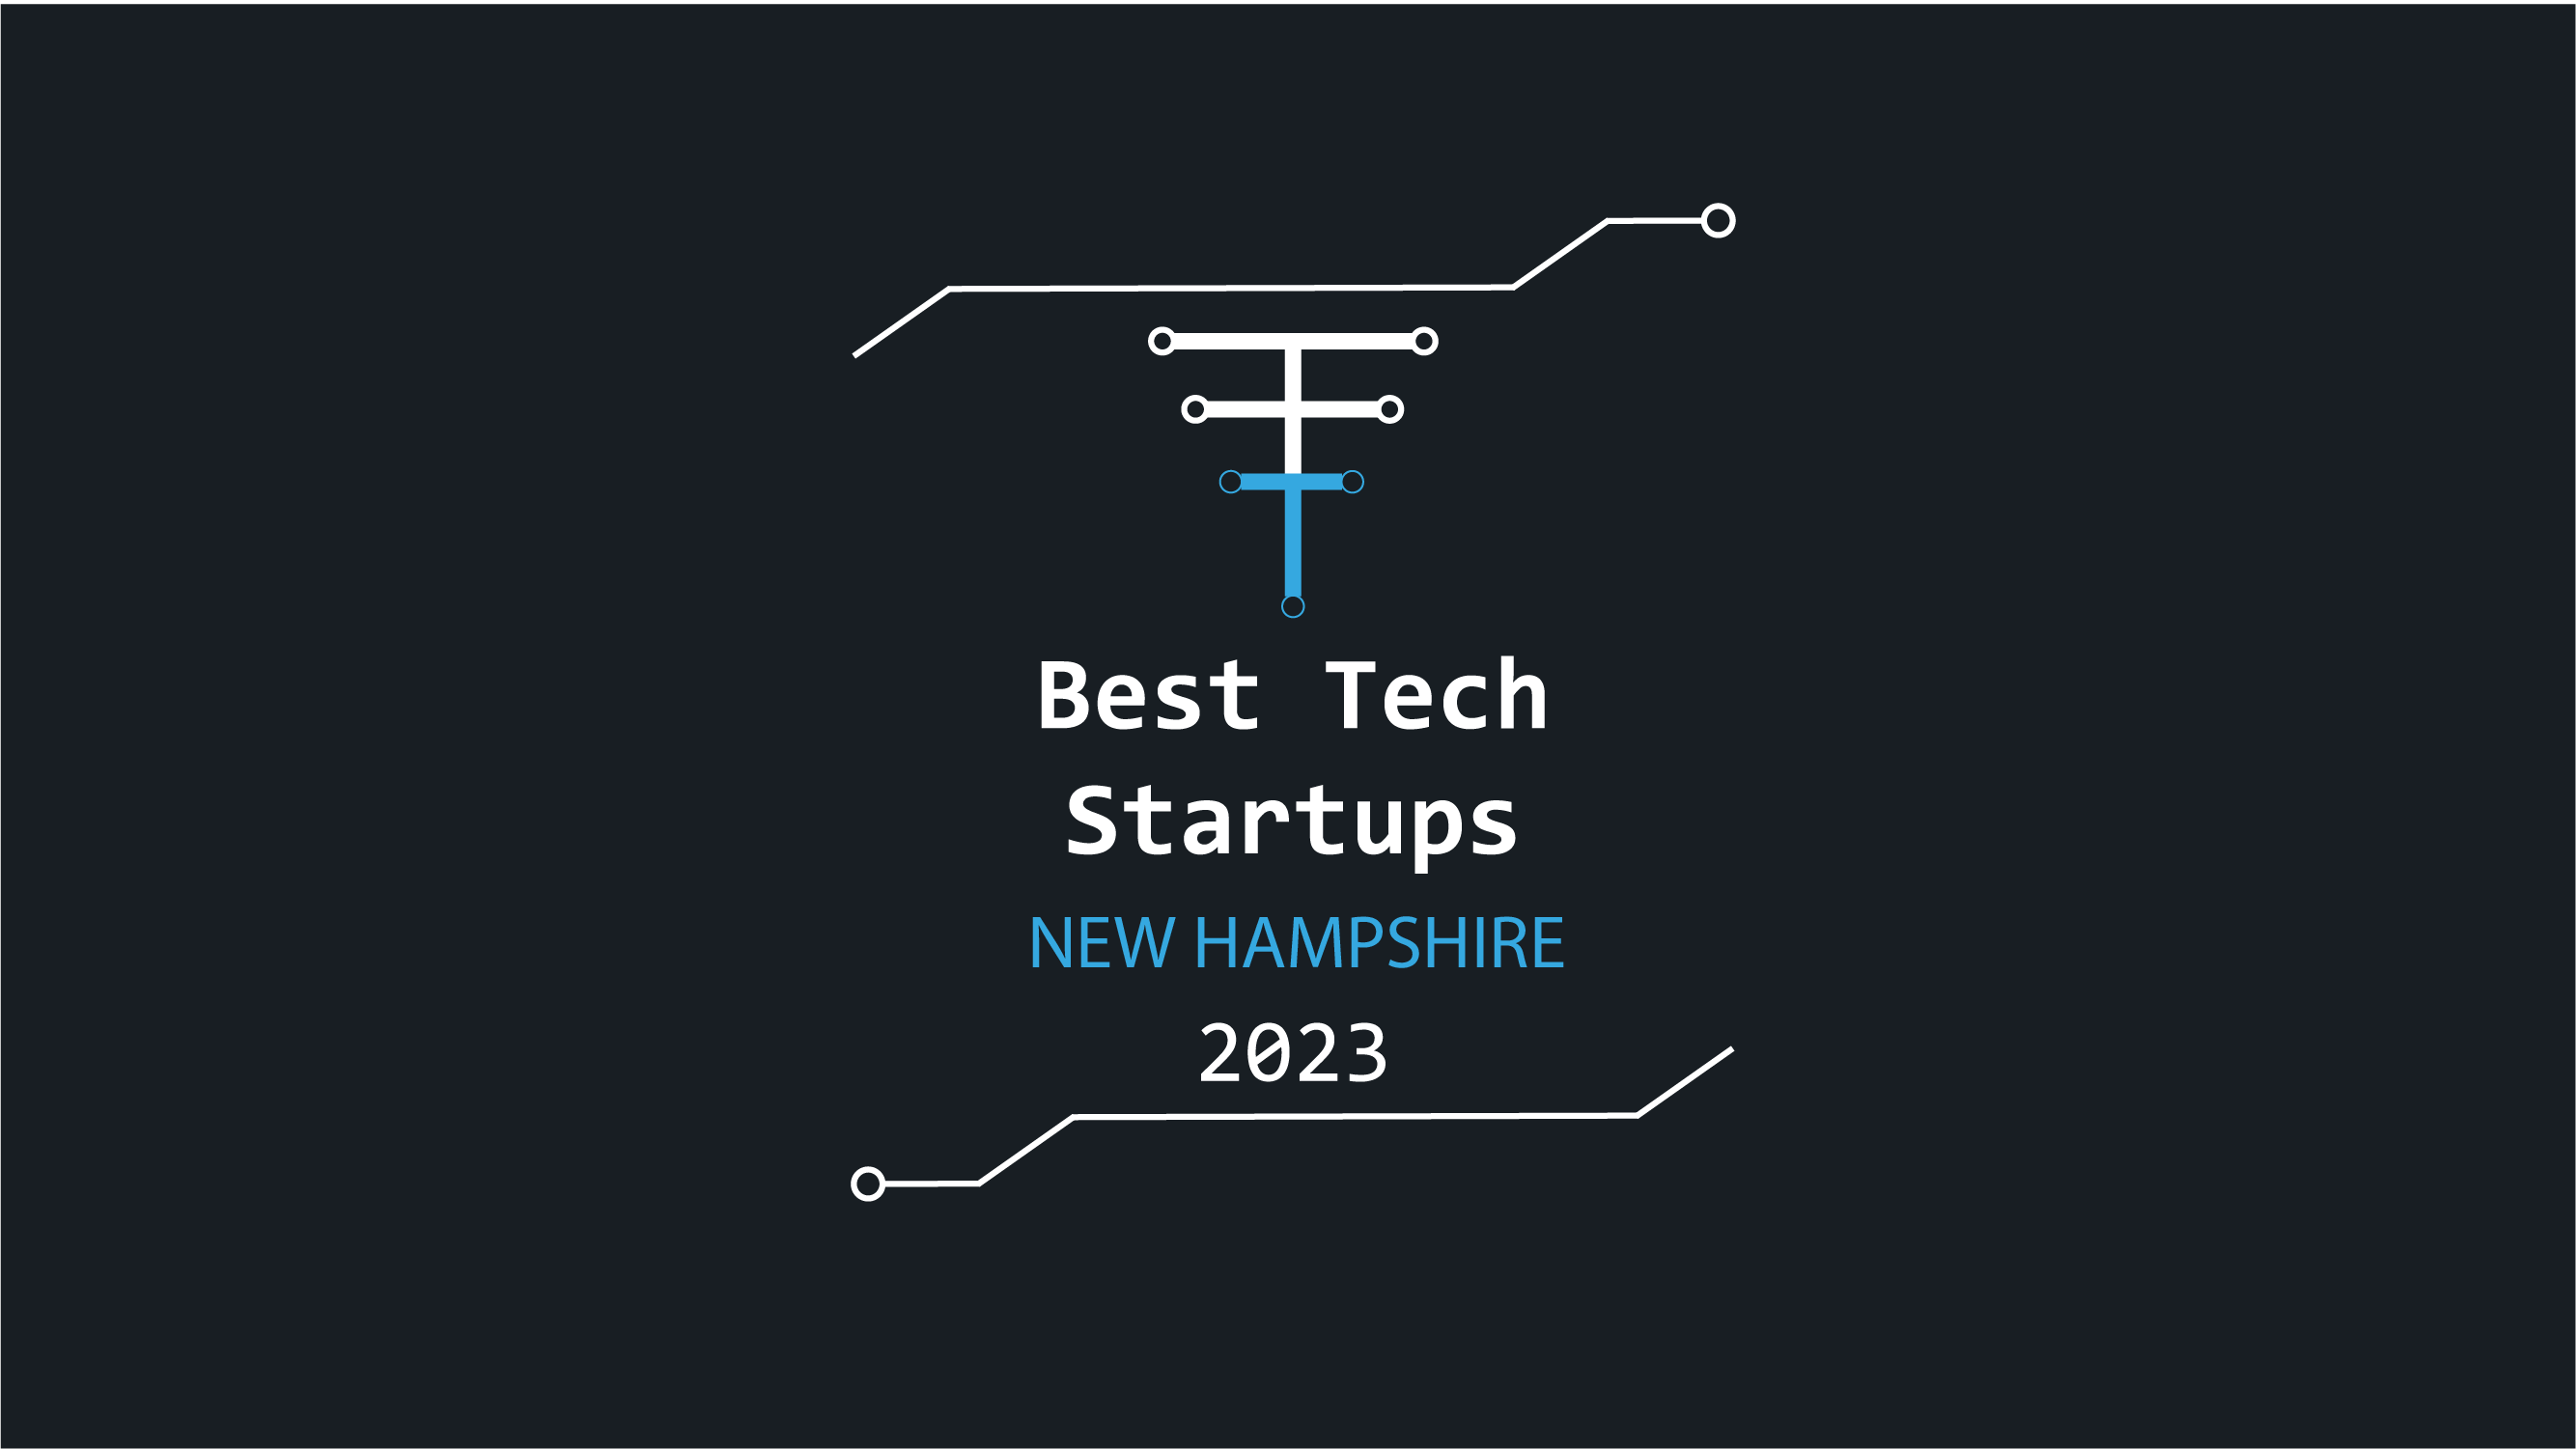 The Best Startup in New Hampshire